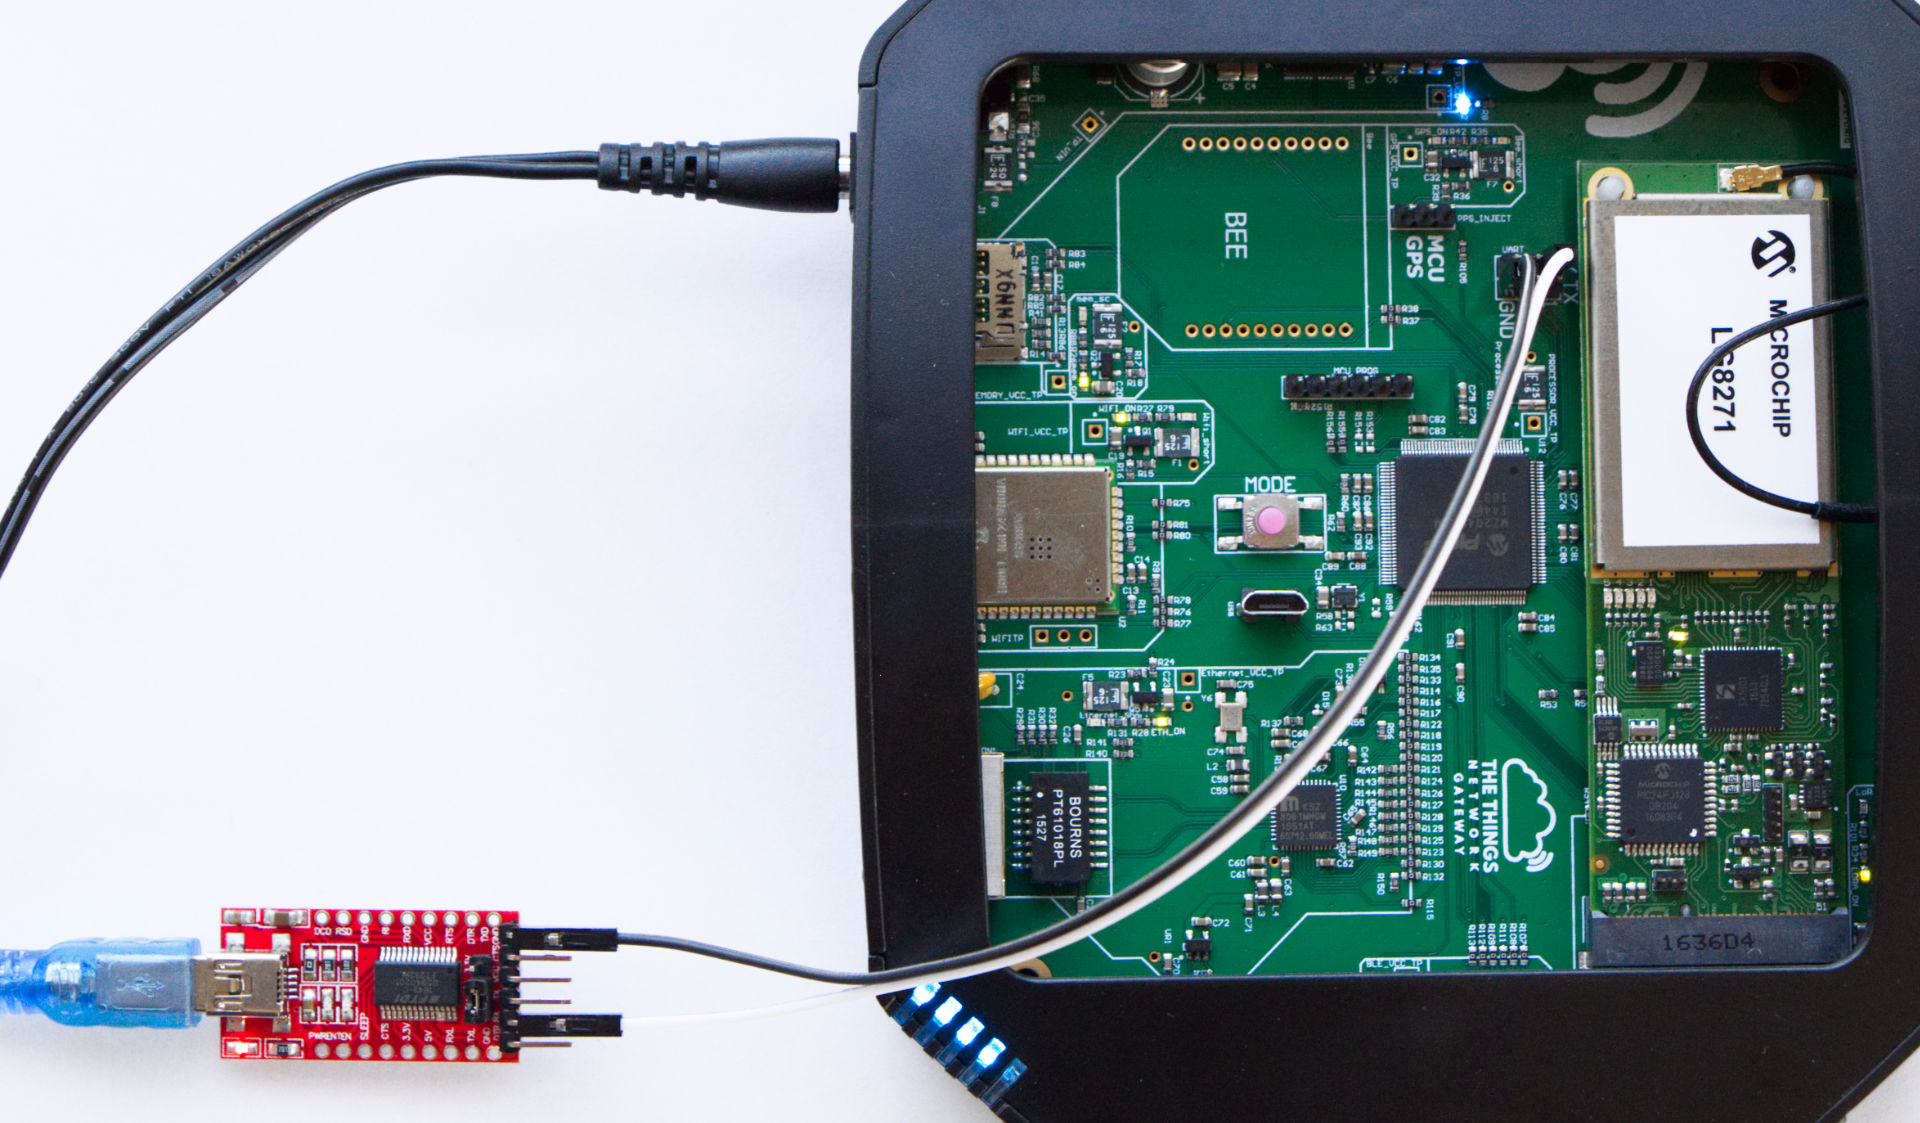 Sample connection between The Things Kickstarter gateway and an UART device